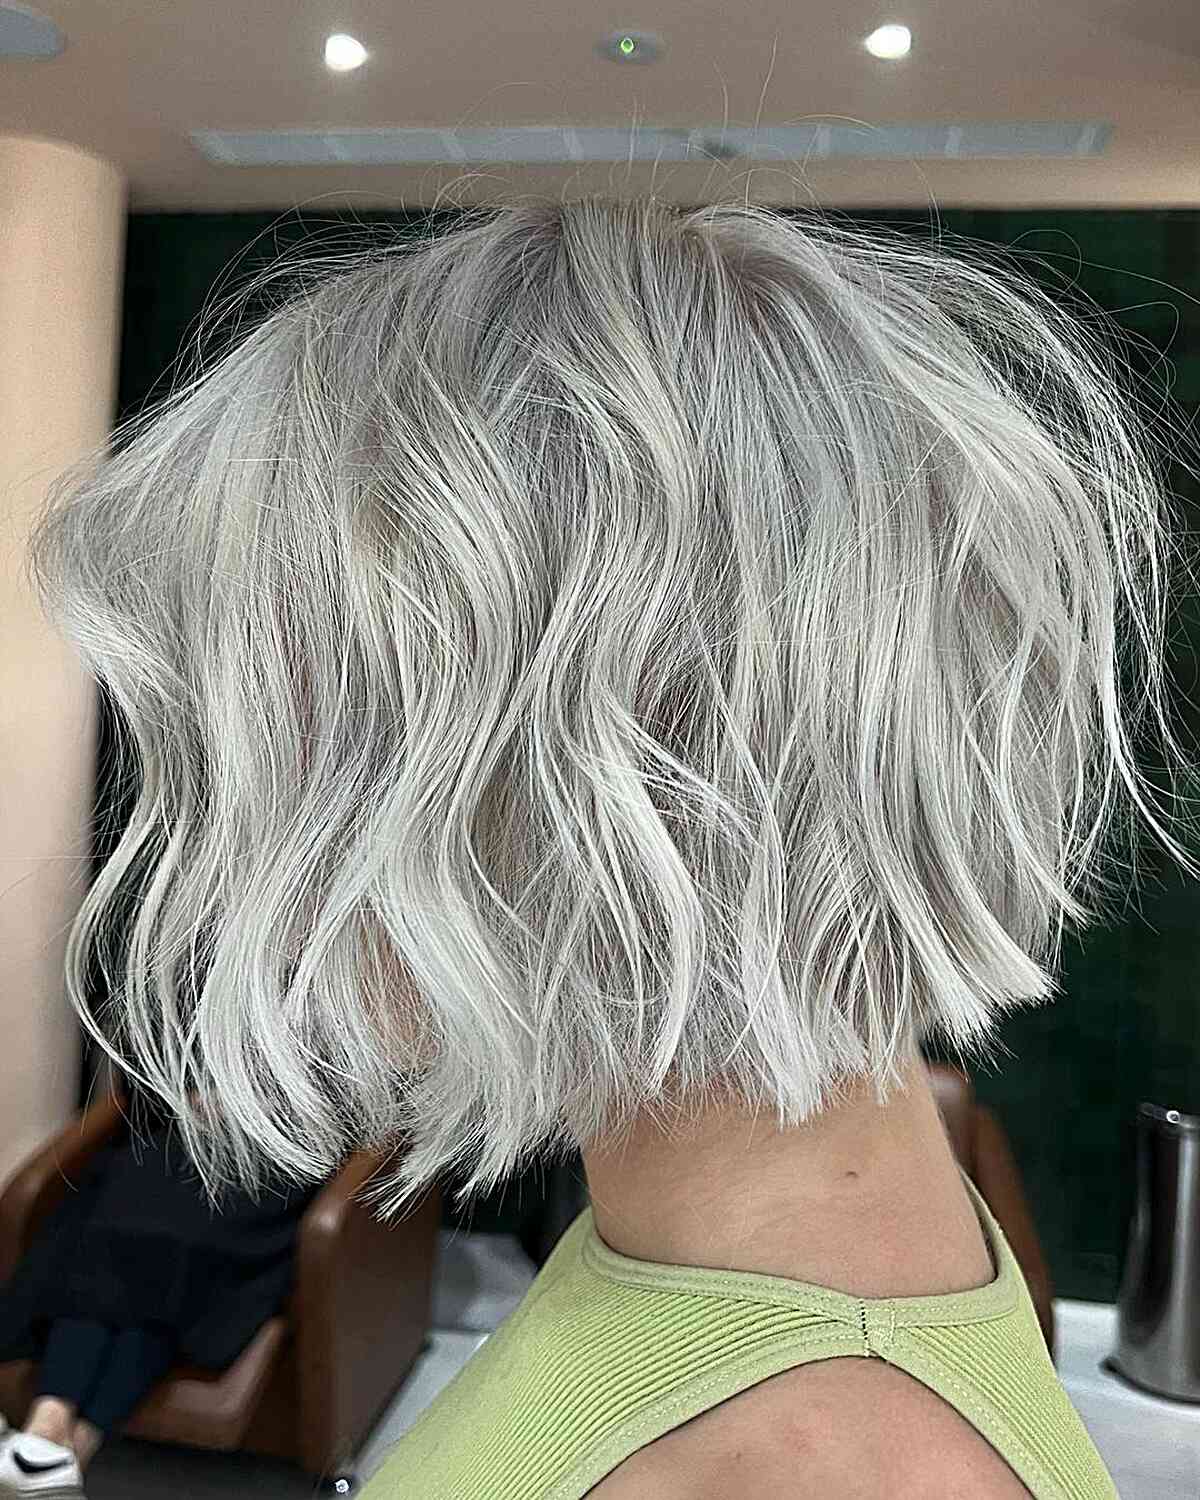 59 Short Blonde Hair Ideas We Can&#039;t Stop Staring At